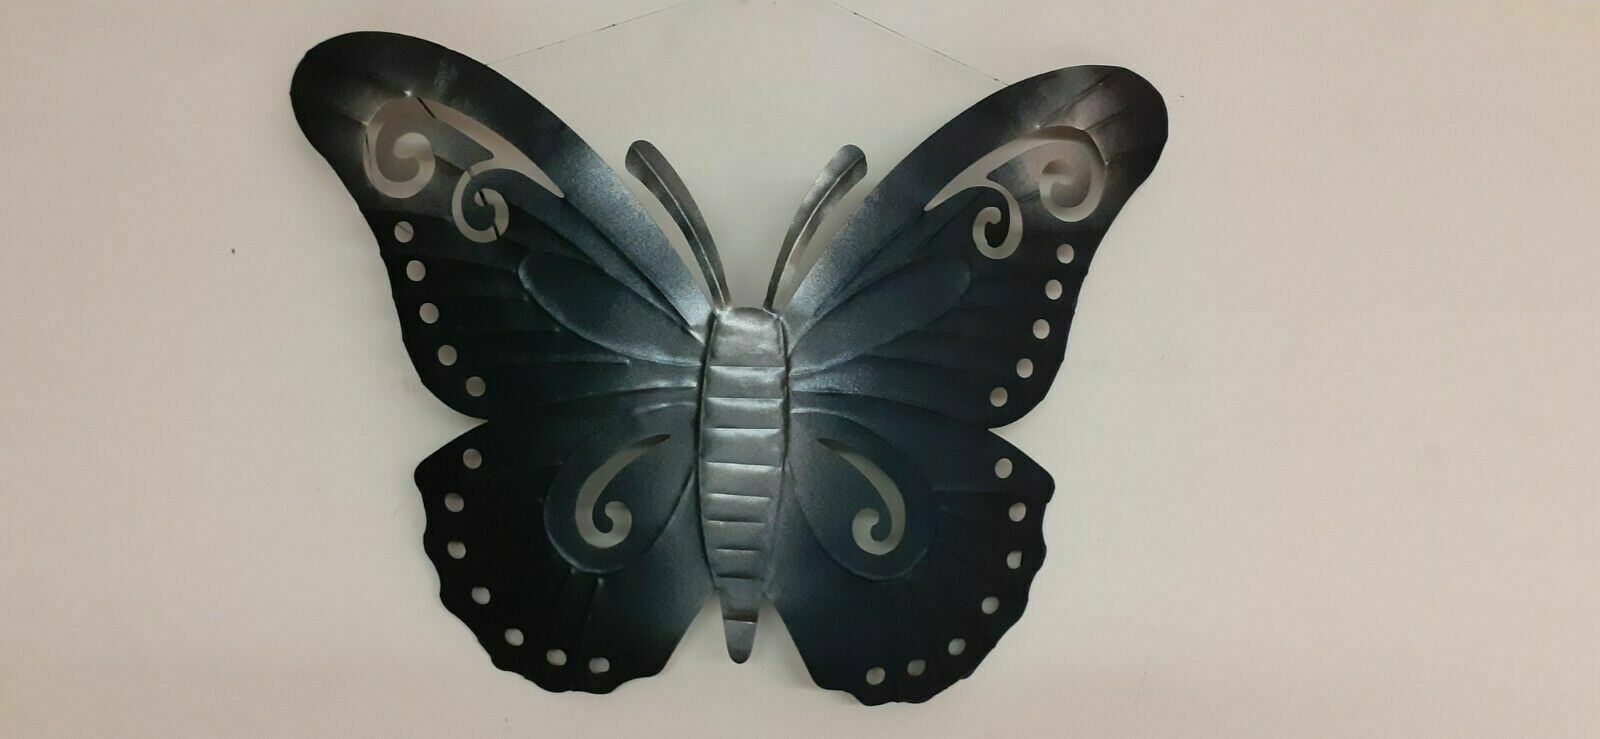 Metal Black Gold Butterfly Wall Art Home Decor Mural Hanging Bedroom Gift - $127.70